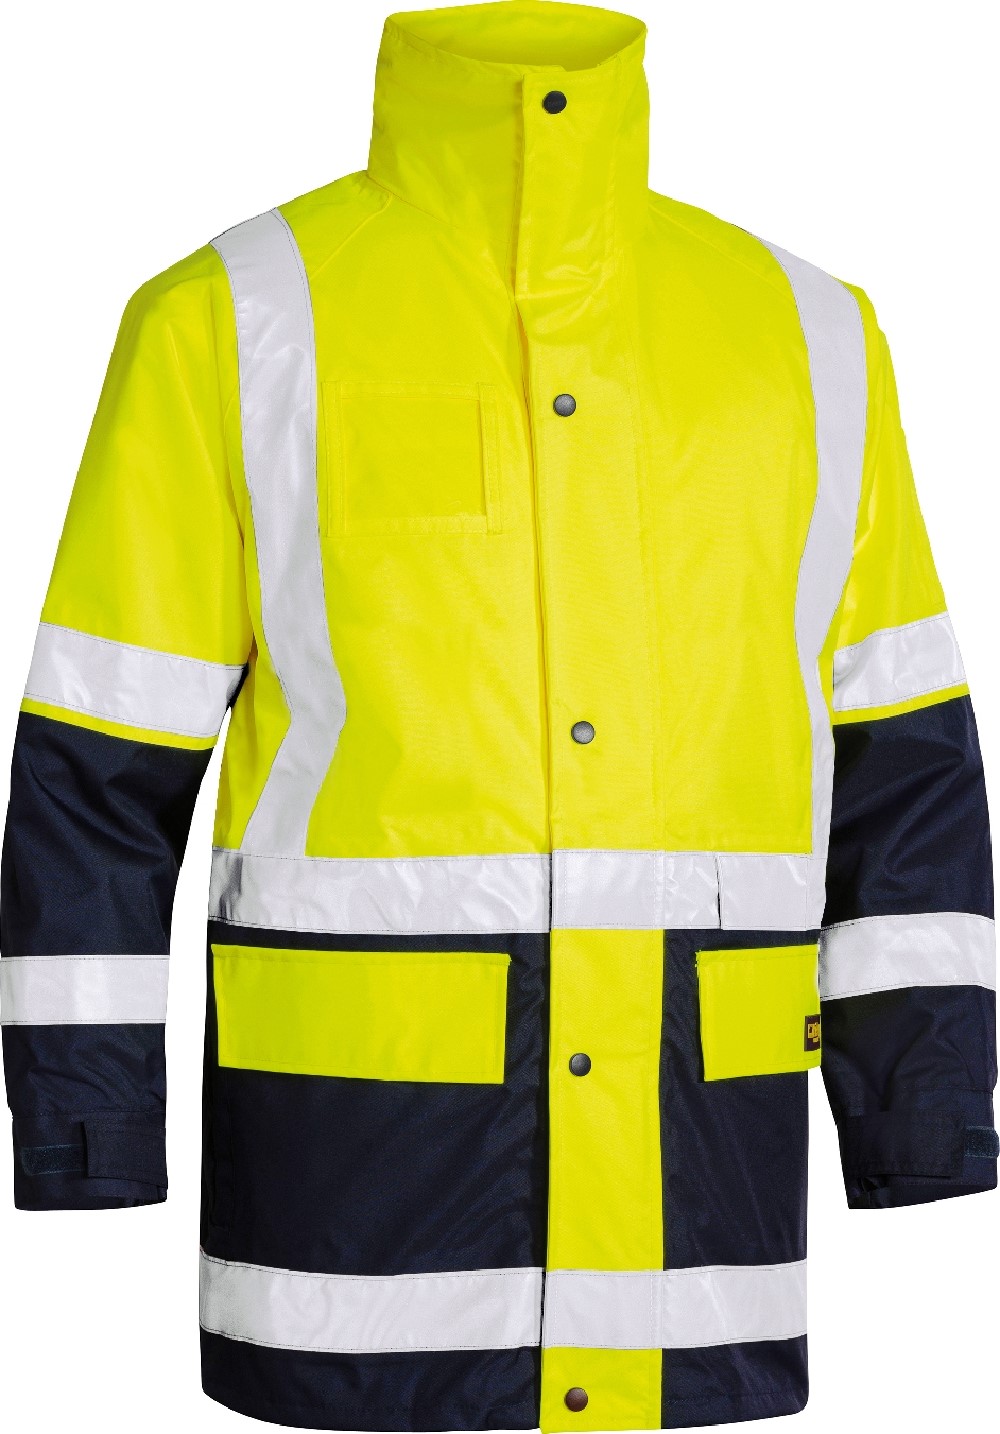 JACKET 5 IN 1 YELLOW/NAVY 2XL -WATERPROOF RATING 20000MM H20